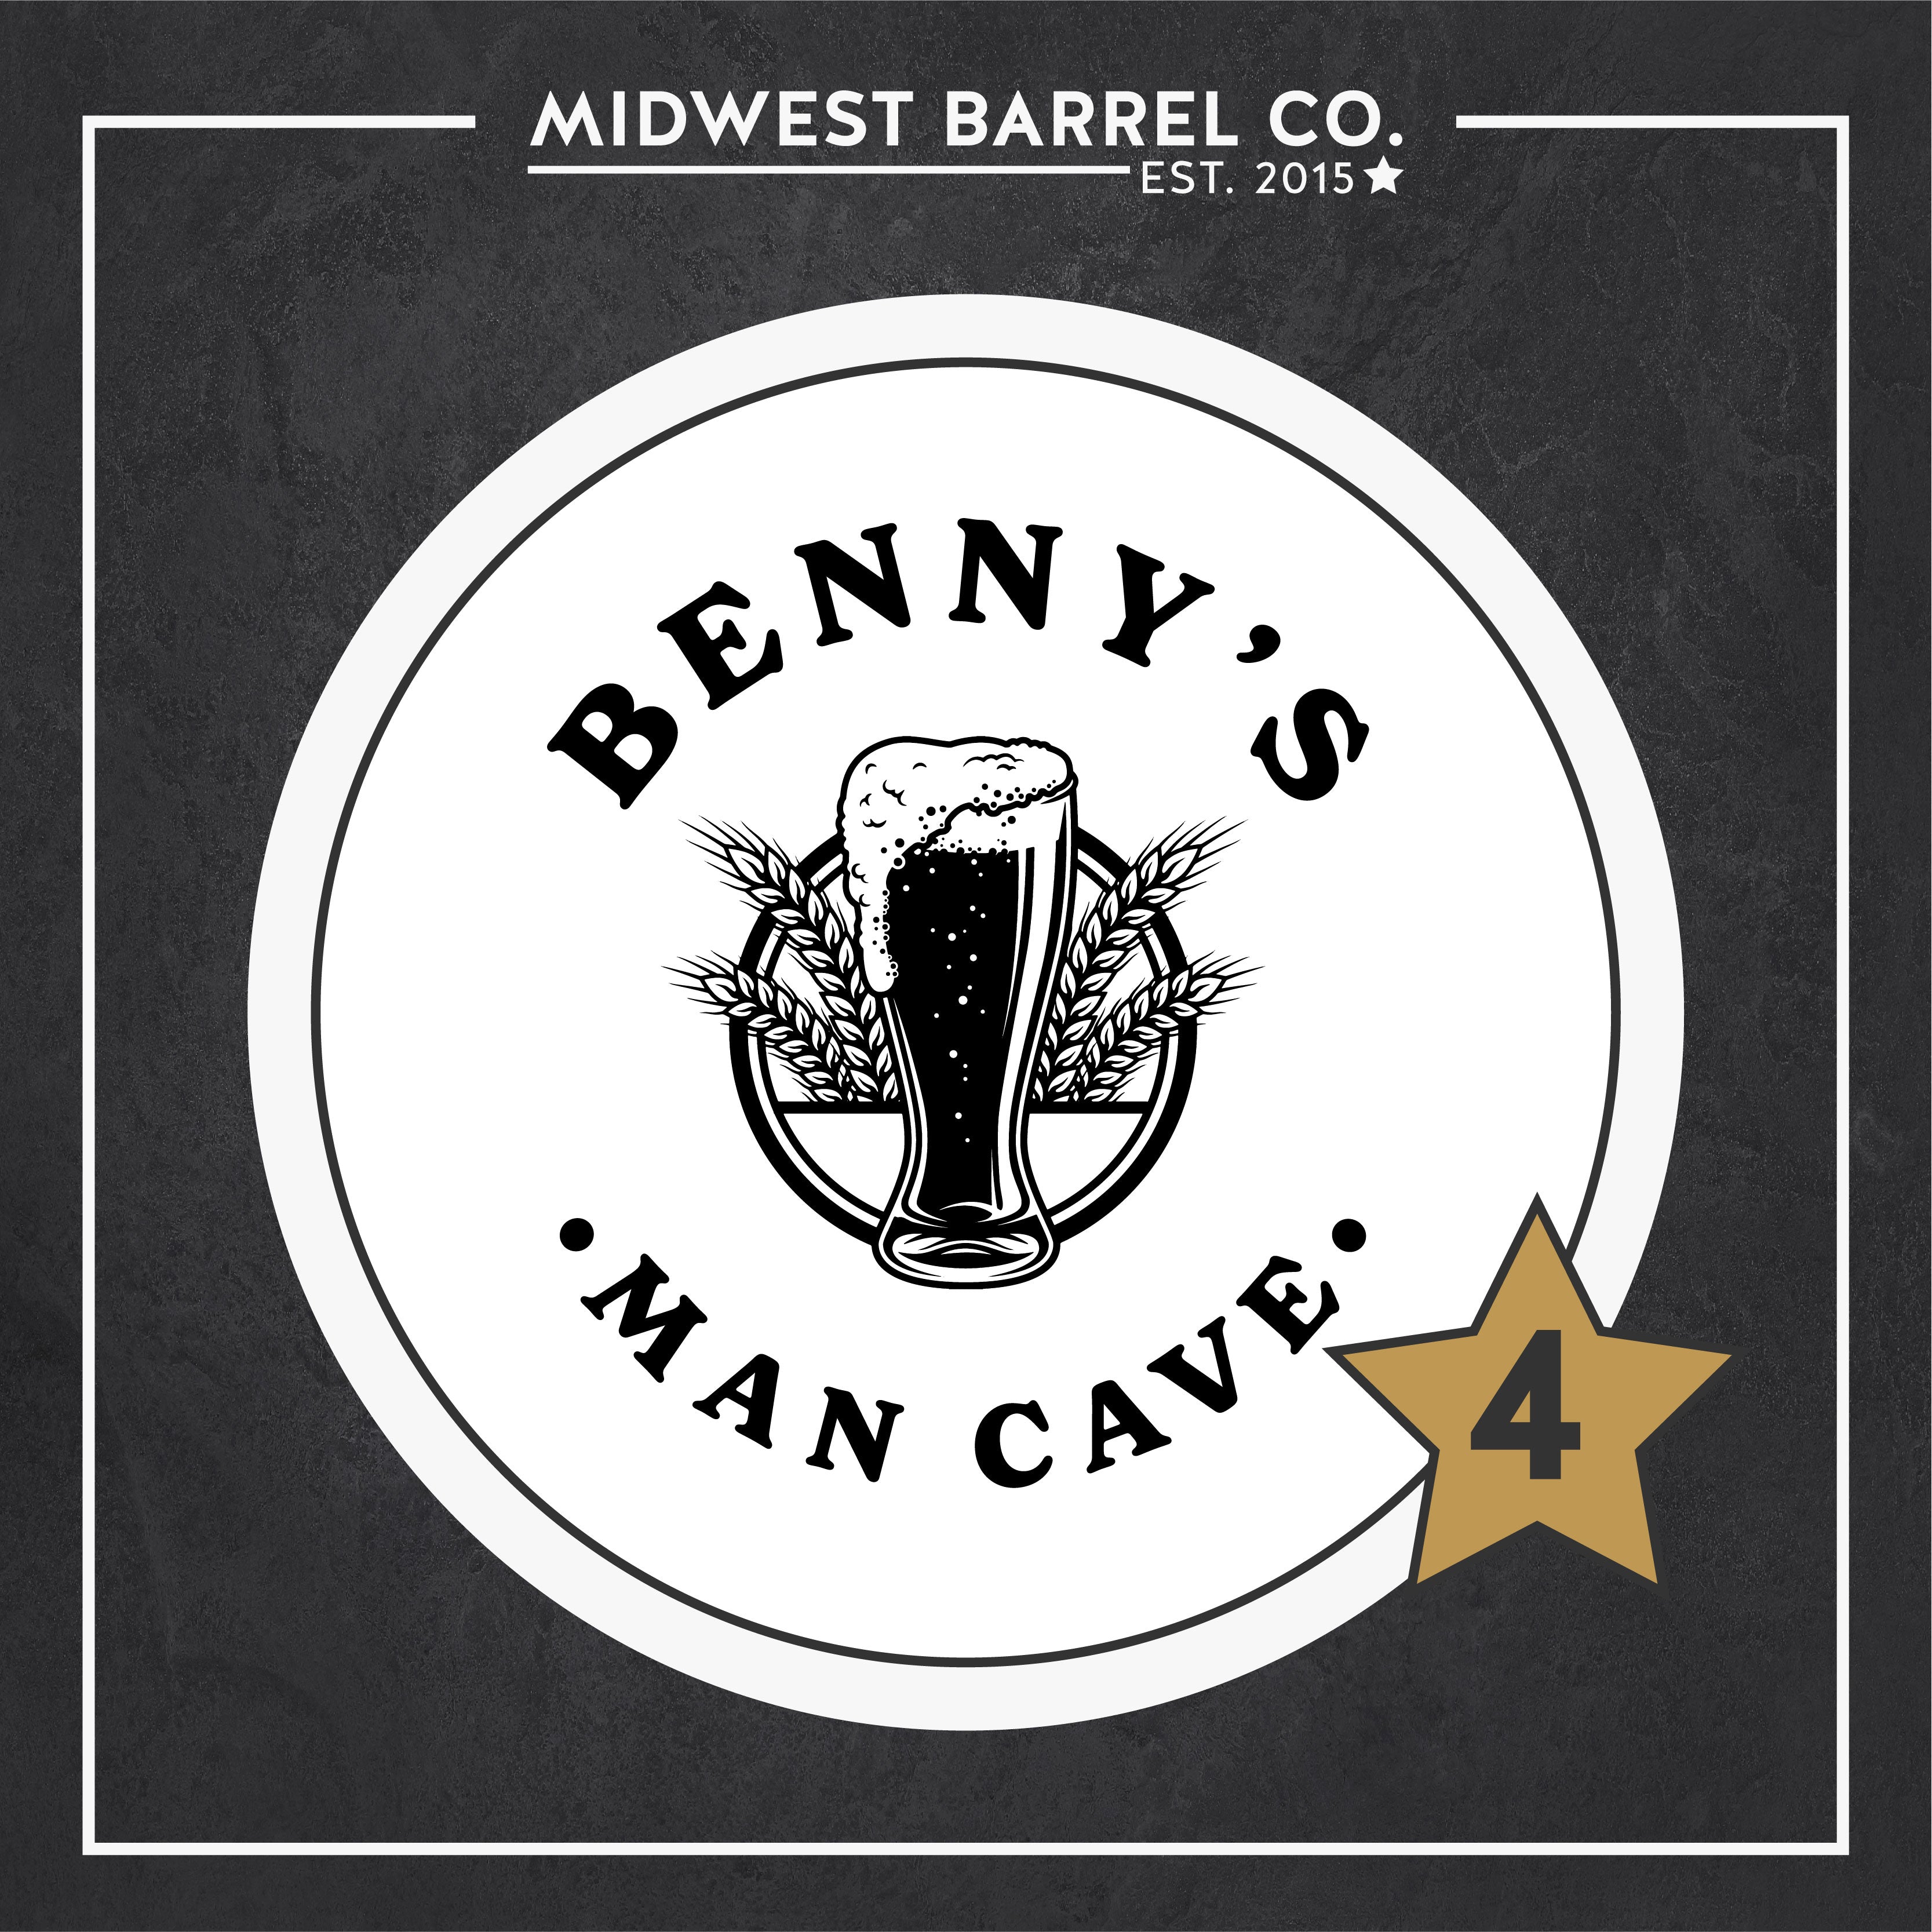 Option No. 4: Benny's Man Cave with tall beer glass overflowing with beer and barley in the background